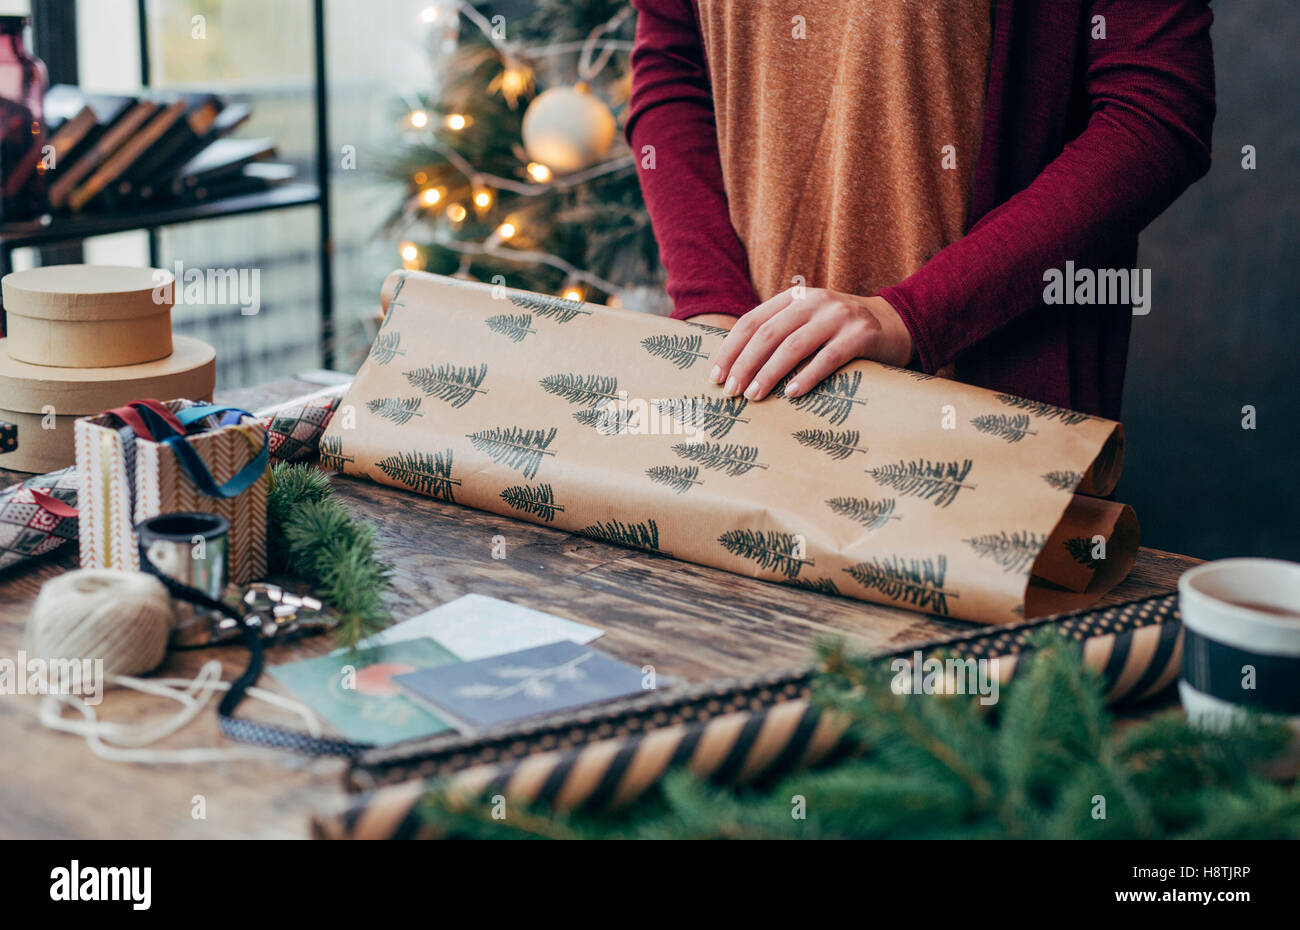 Woman Wrapping and Decorating Christmas Present Stock Photo